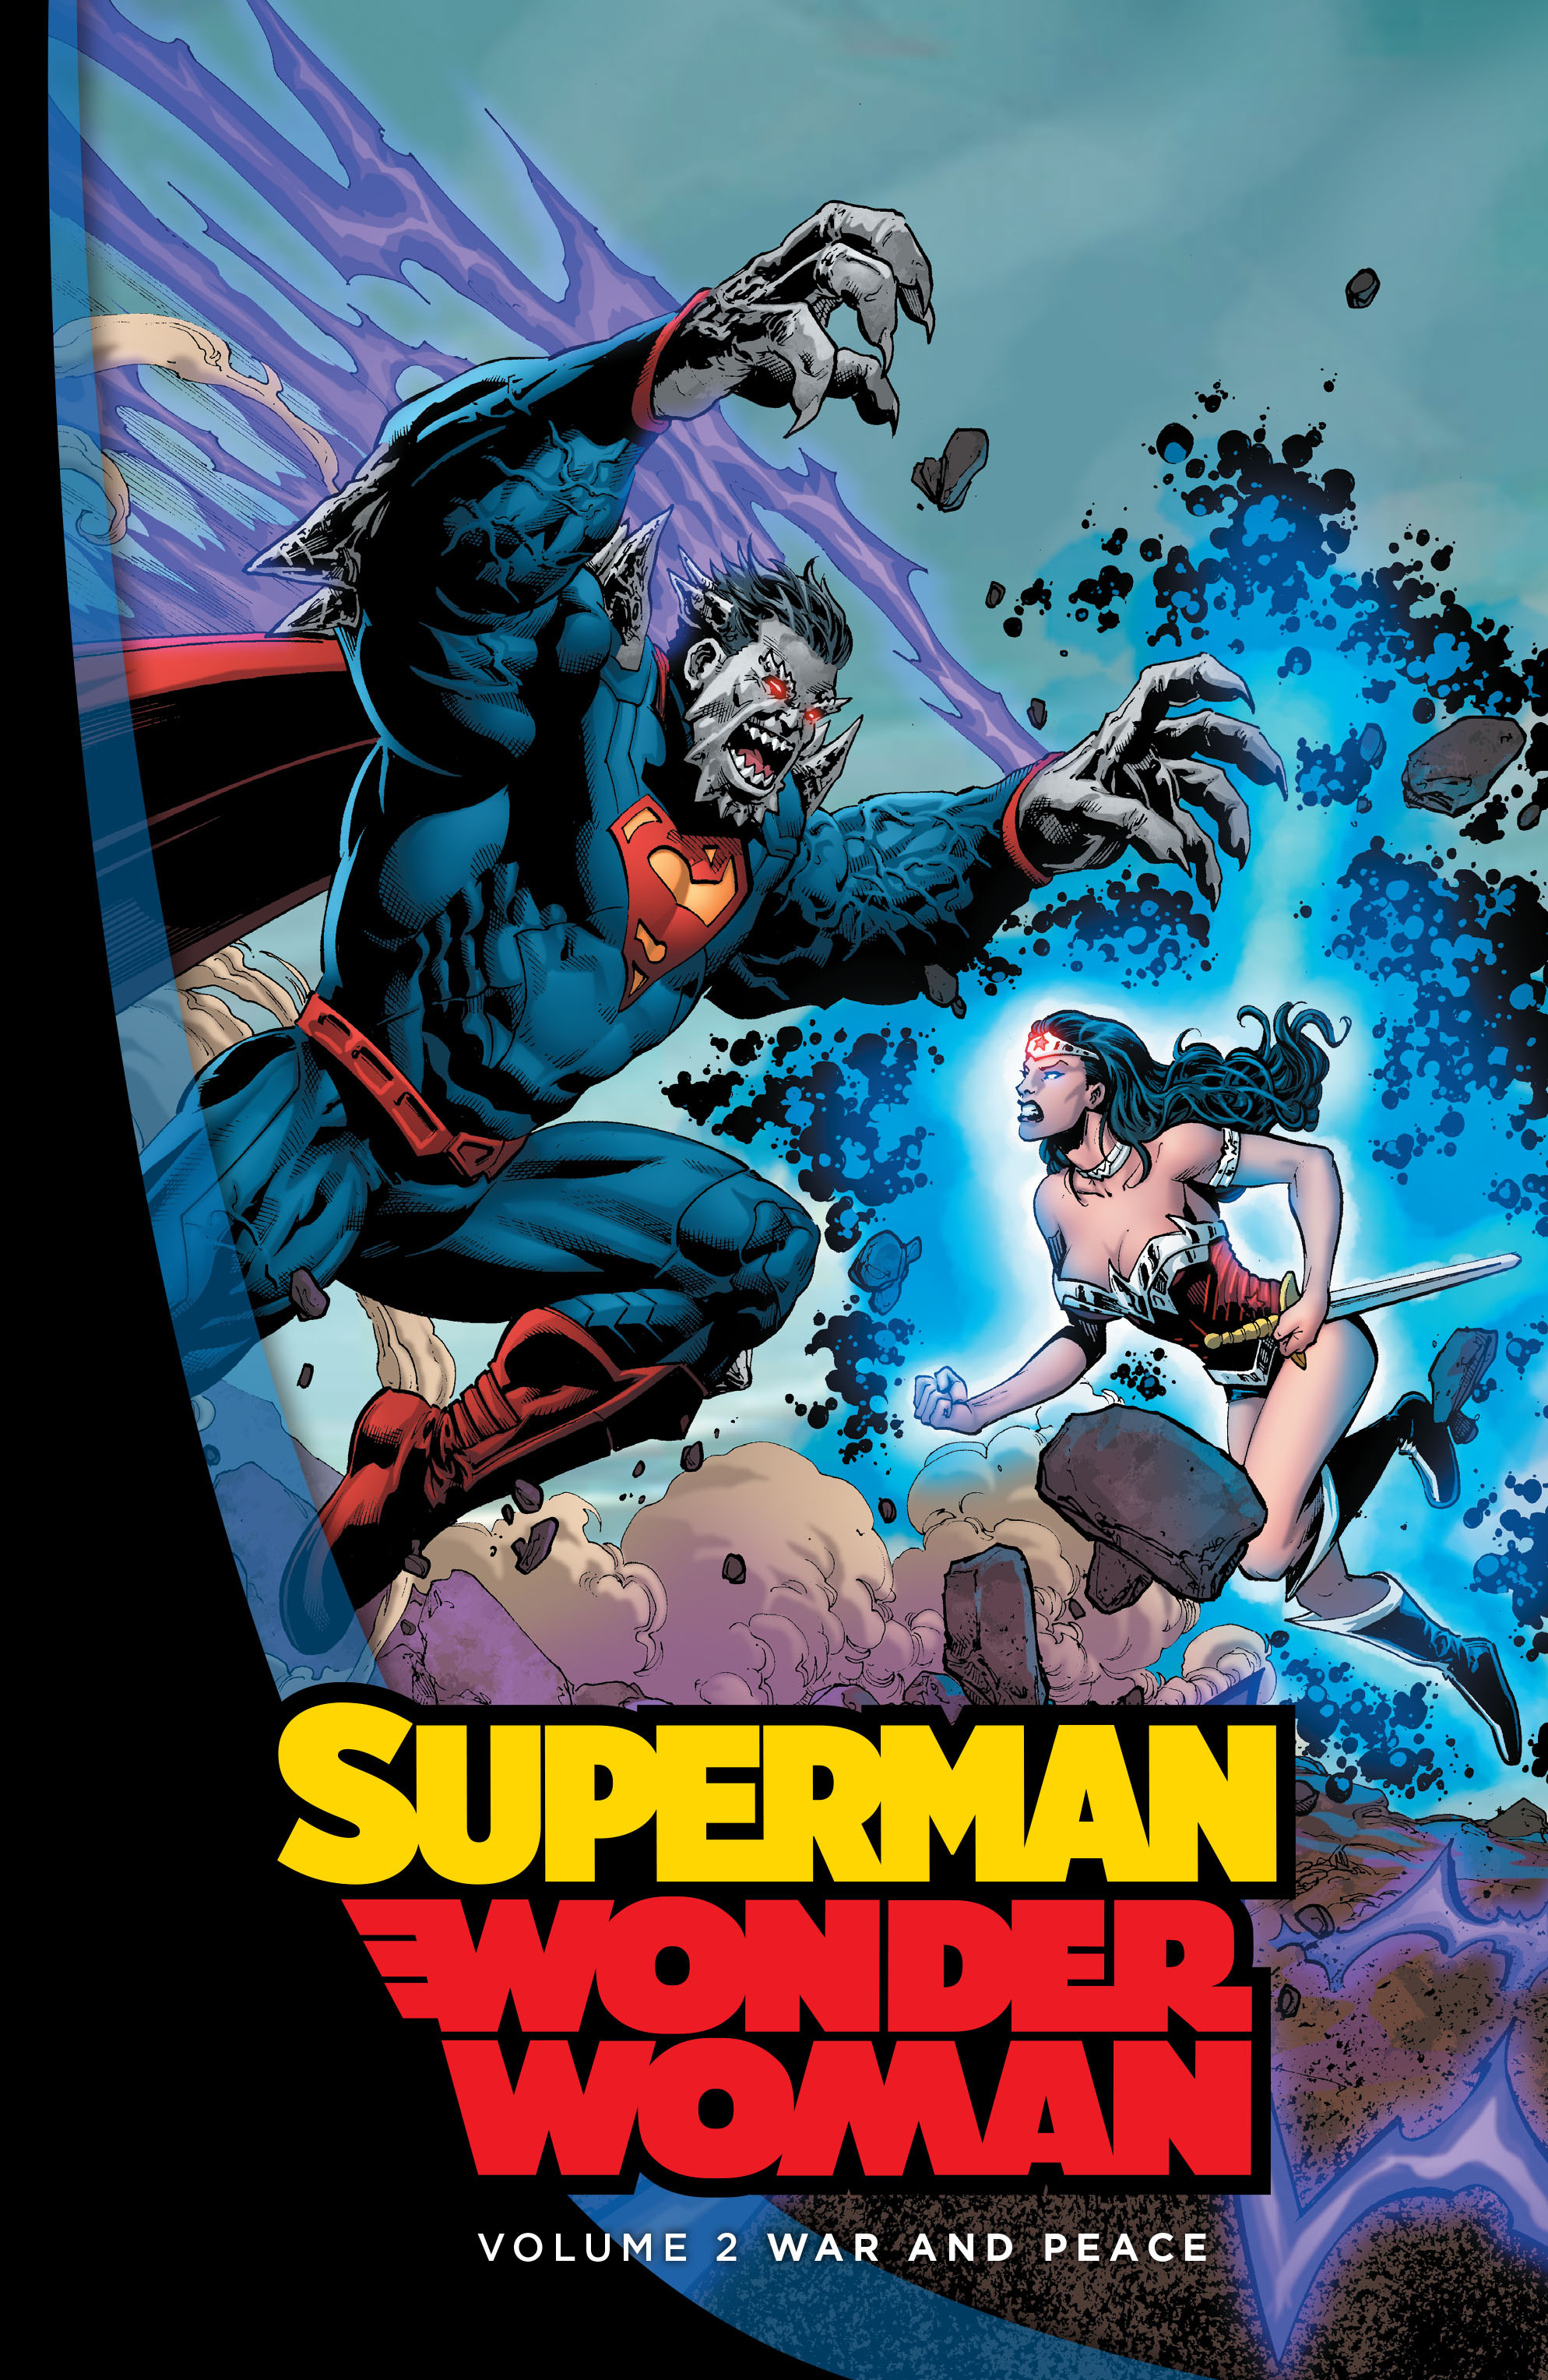 Read online Superman/Wonder Woman comic -  Issue # _TPB 2 - War and Peace - 2